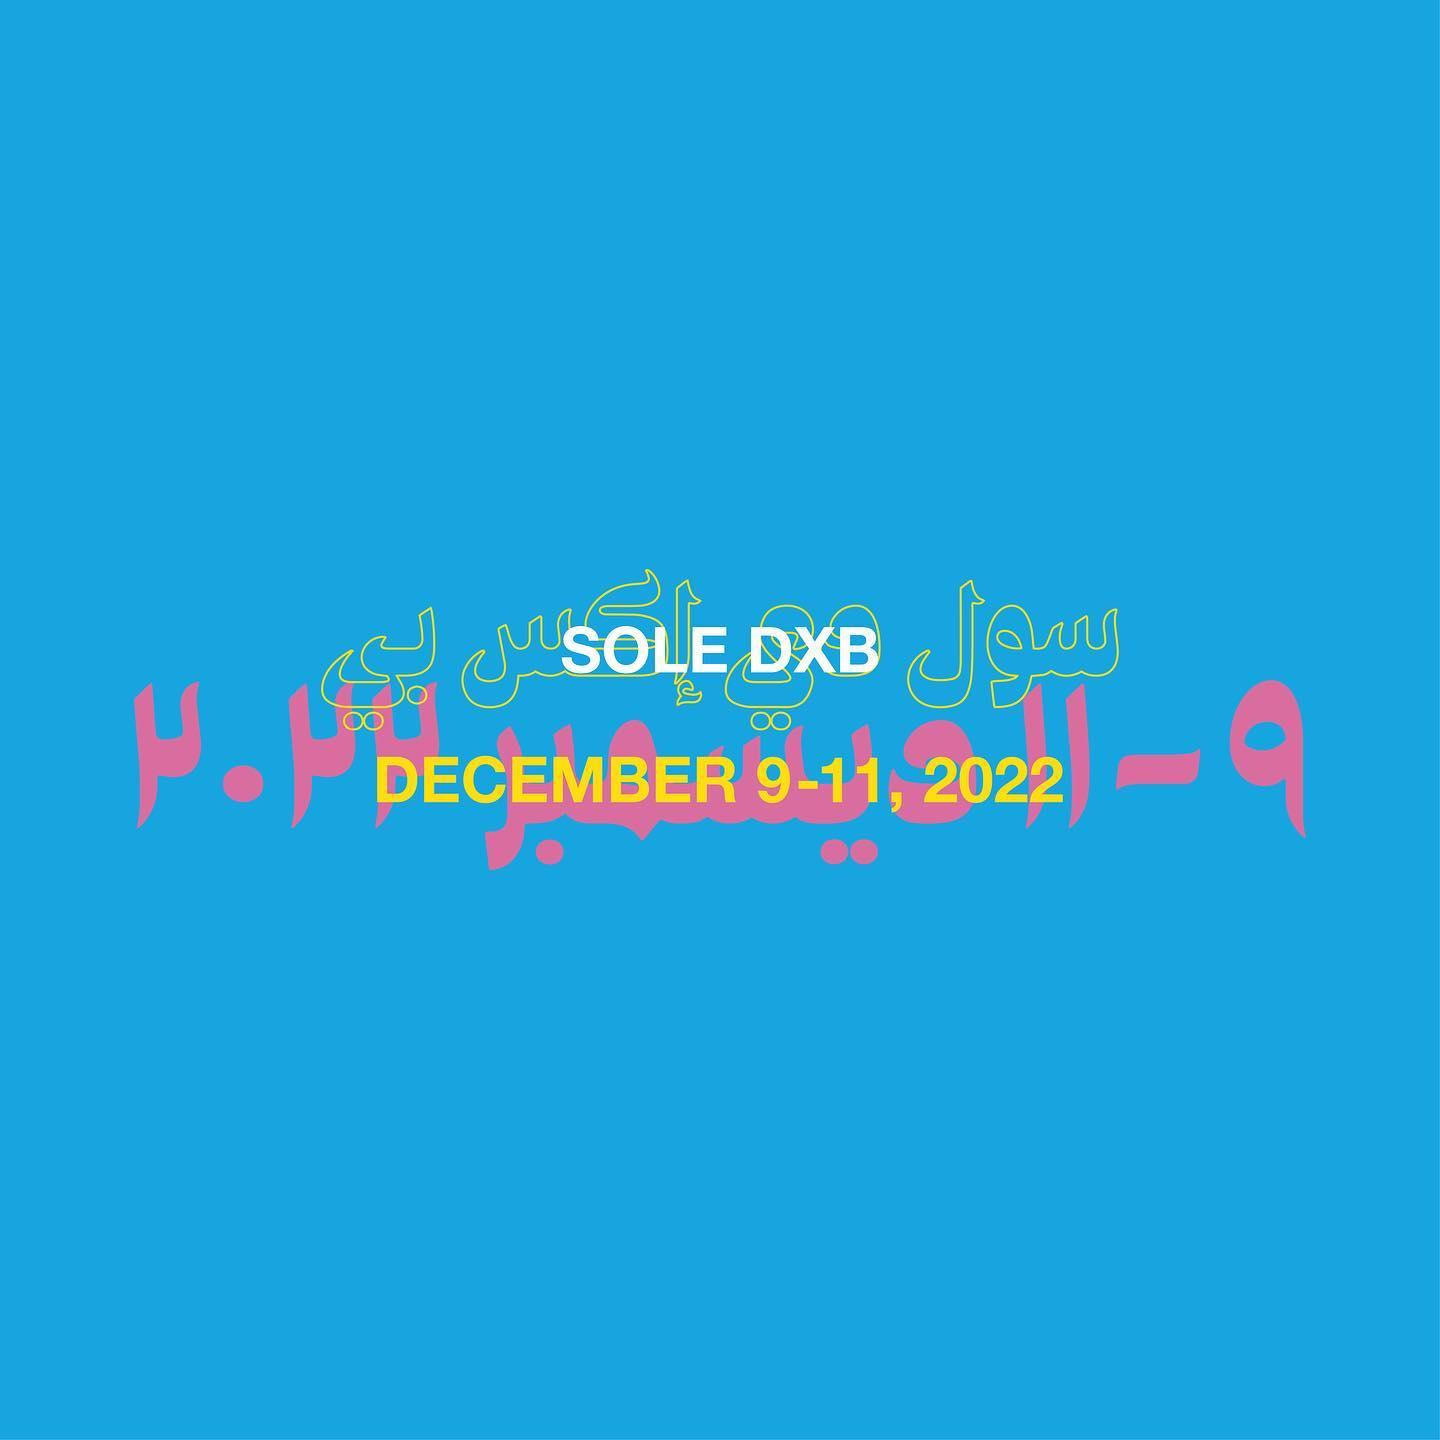 DON'T MISS THIS: SOLE DXB IS BACK IN 2022! 